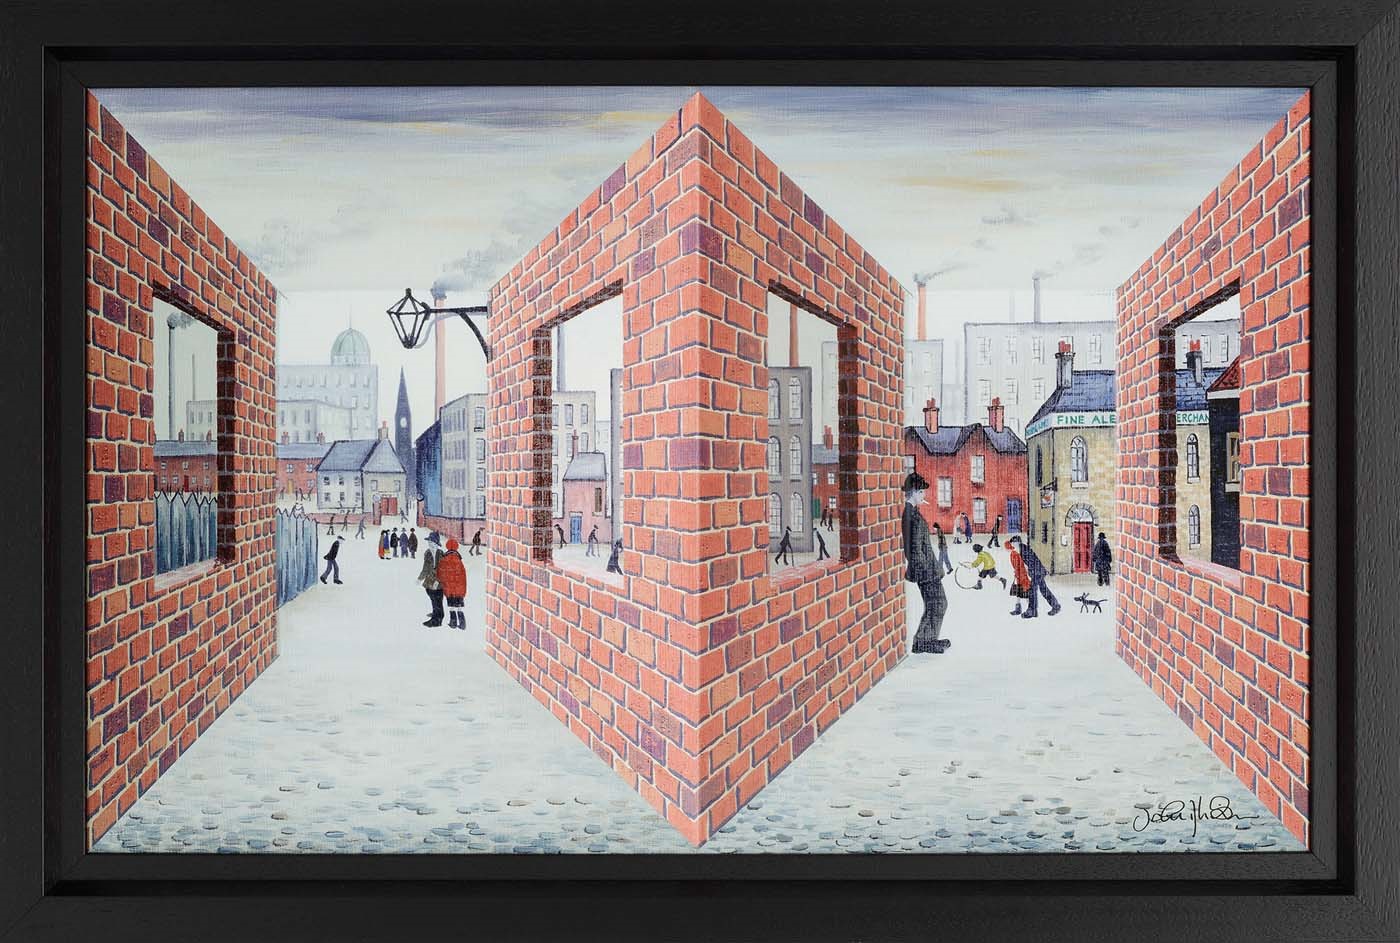 Waiting for Opening Time by John D Wilson, Lowry | 3D | Northern